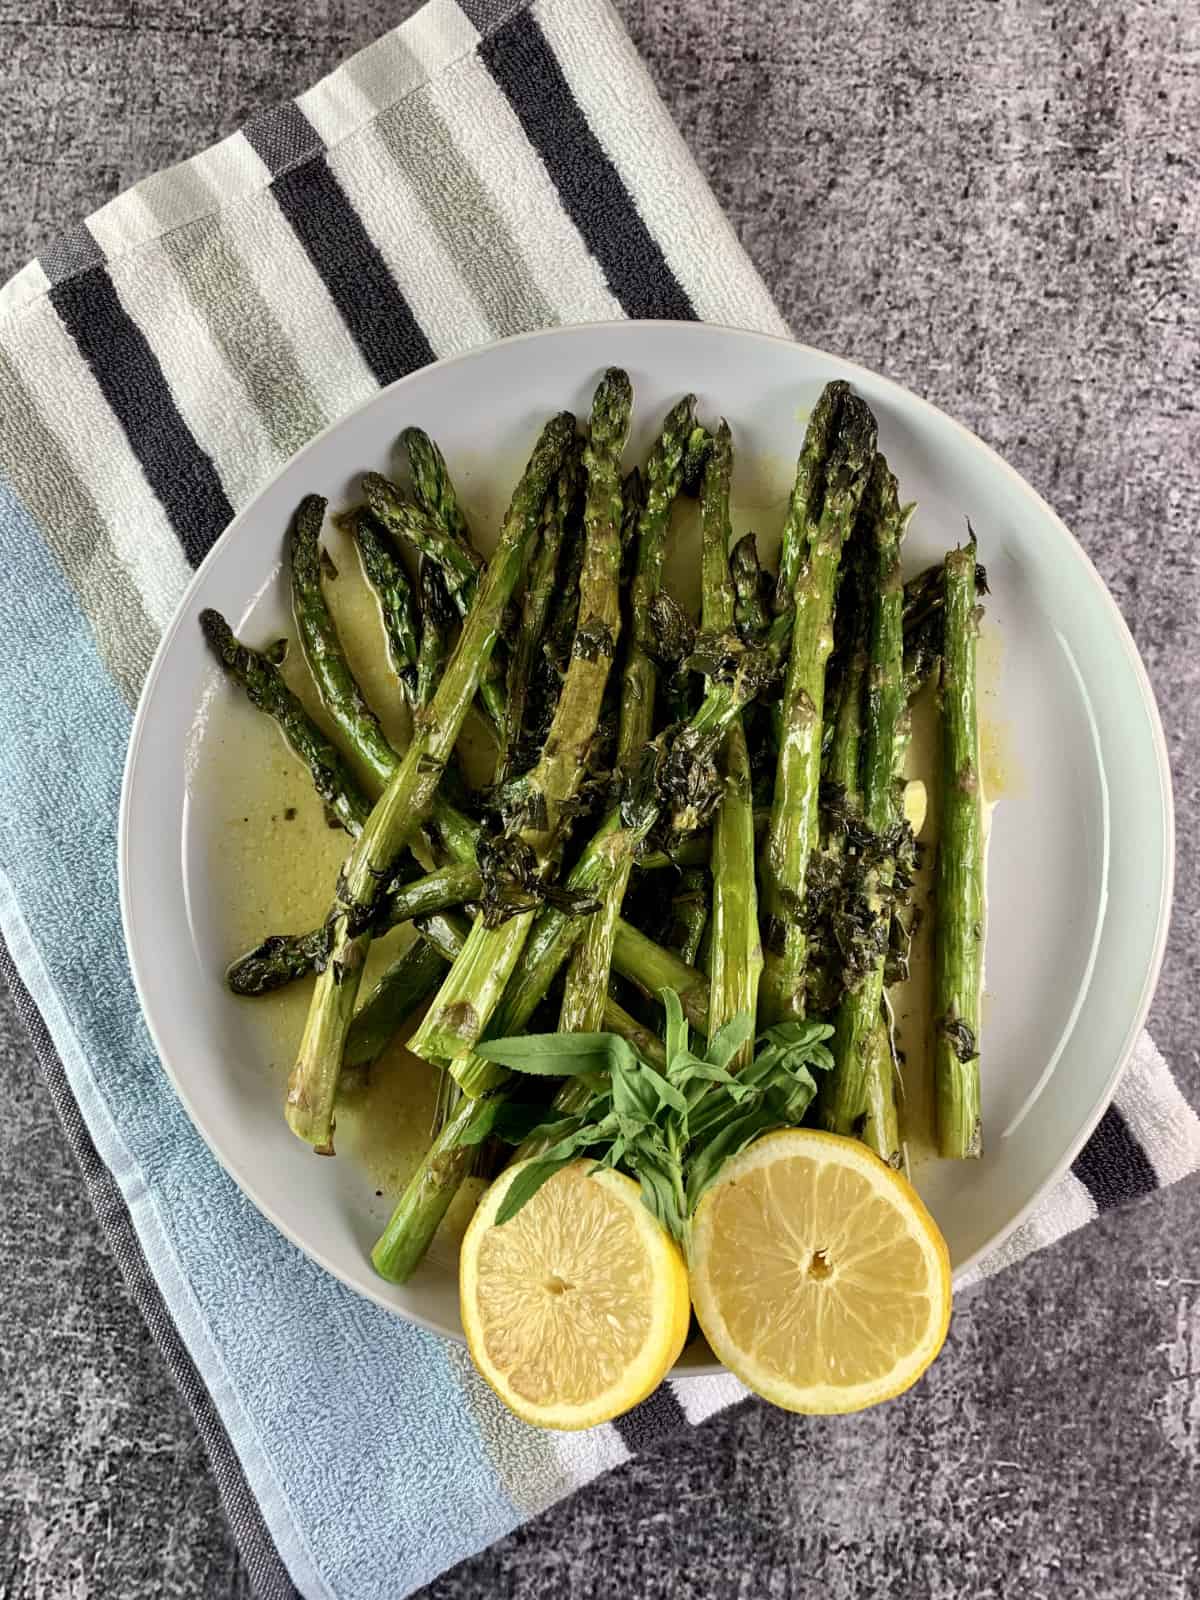 Oven roasted asparagus, with a halved lemon on a white plate on top of a striped tea towel.